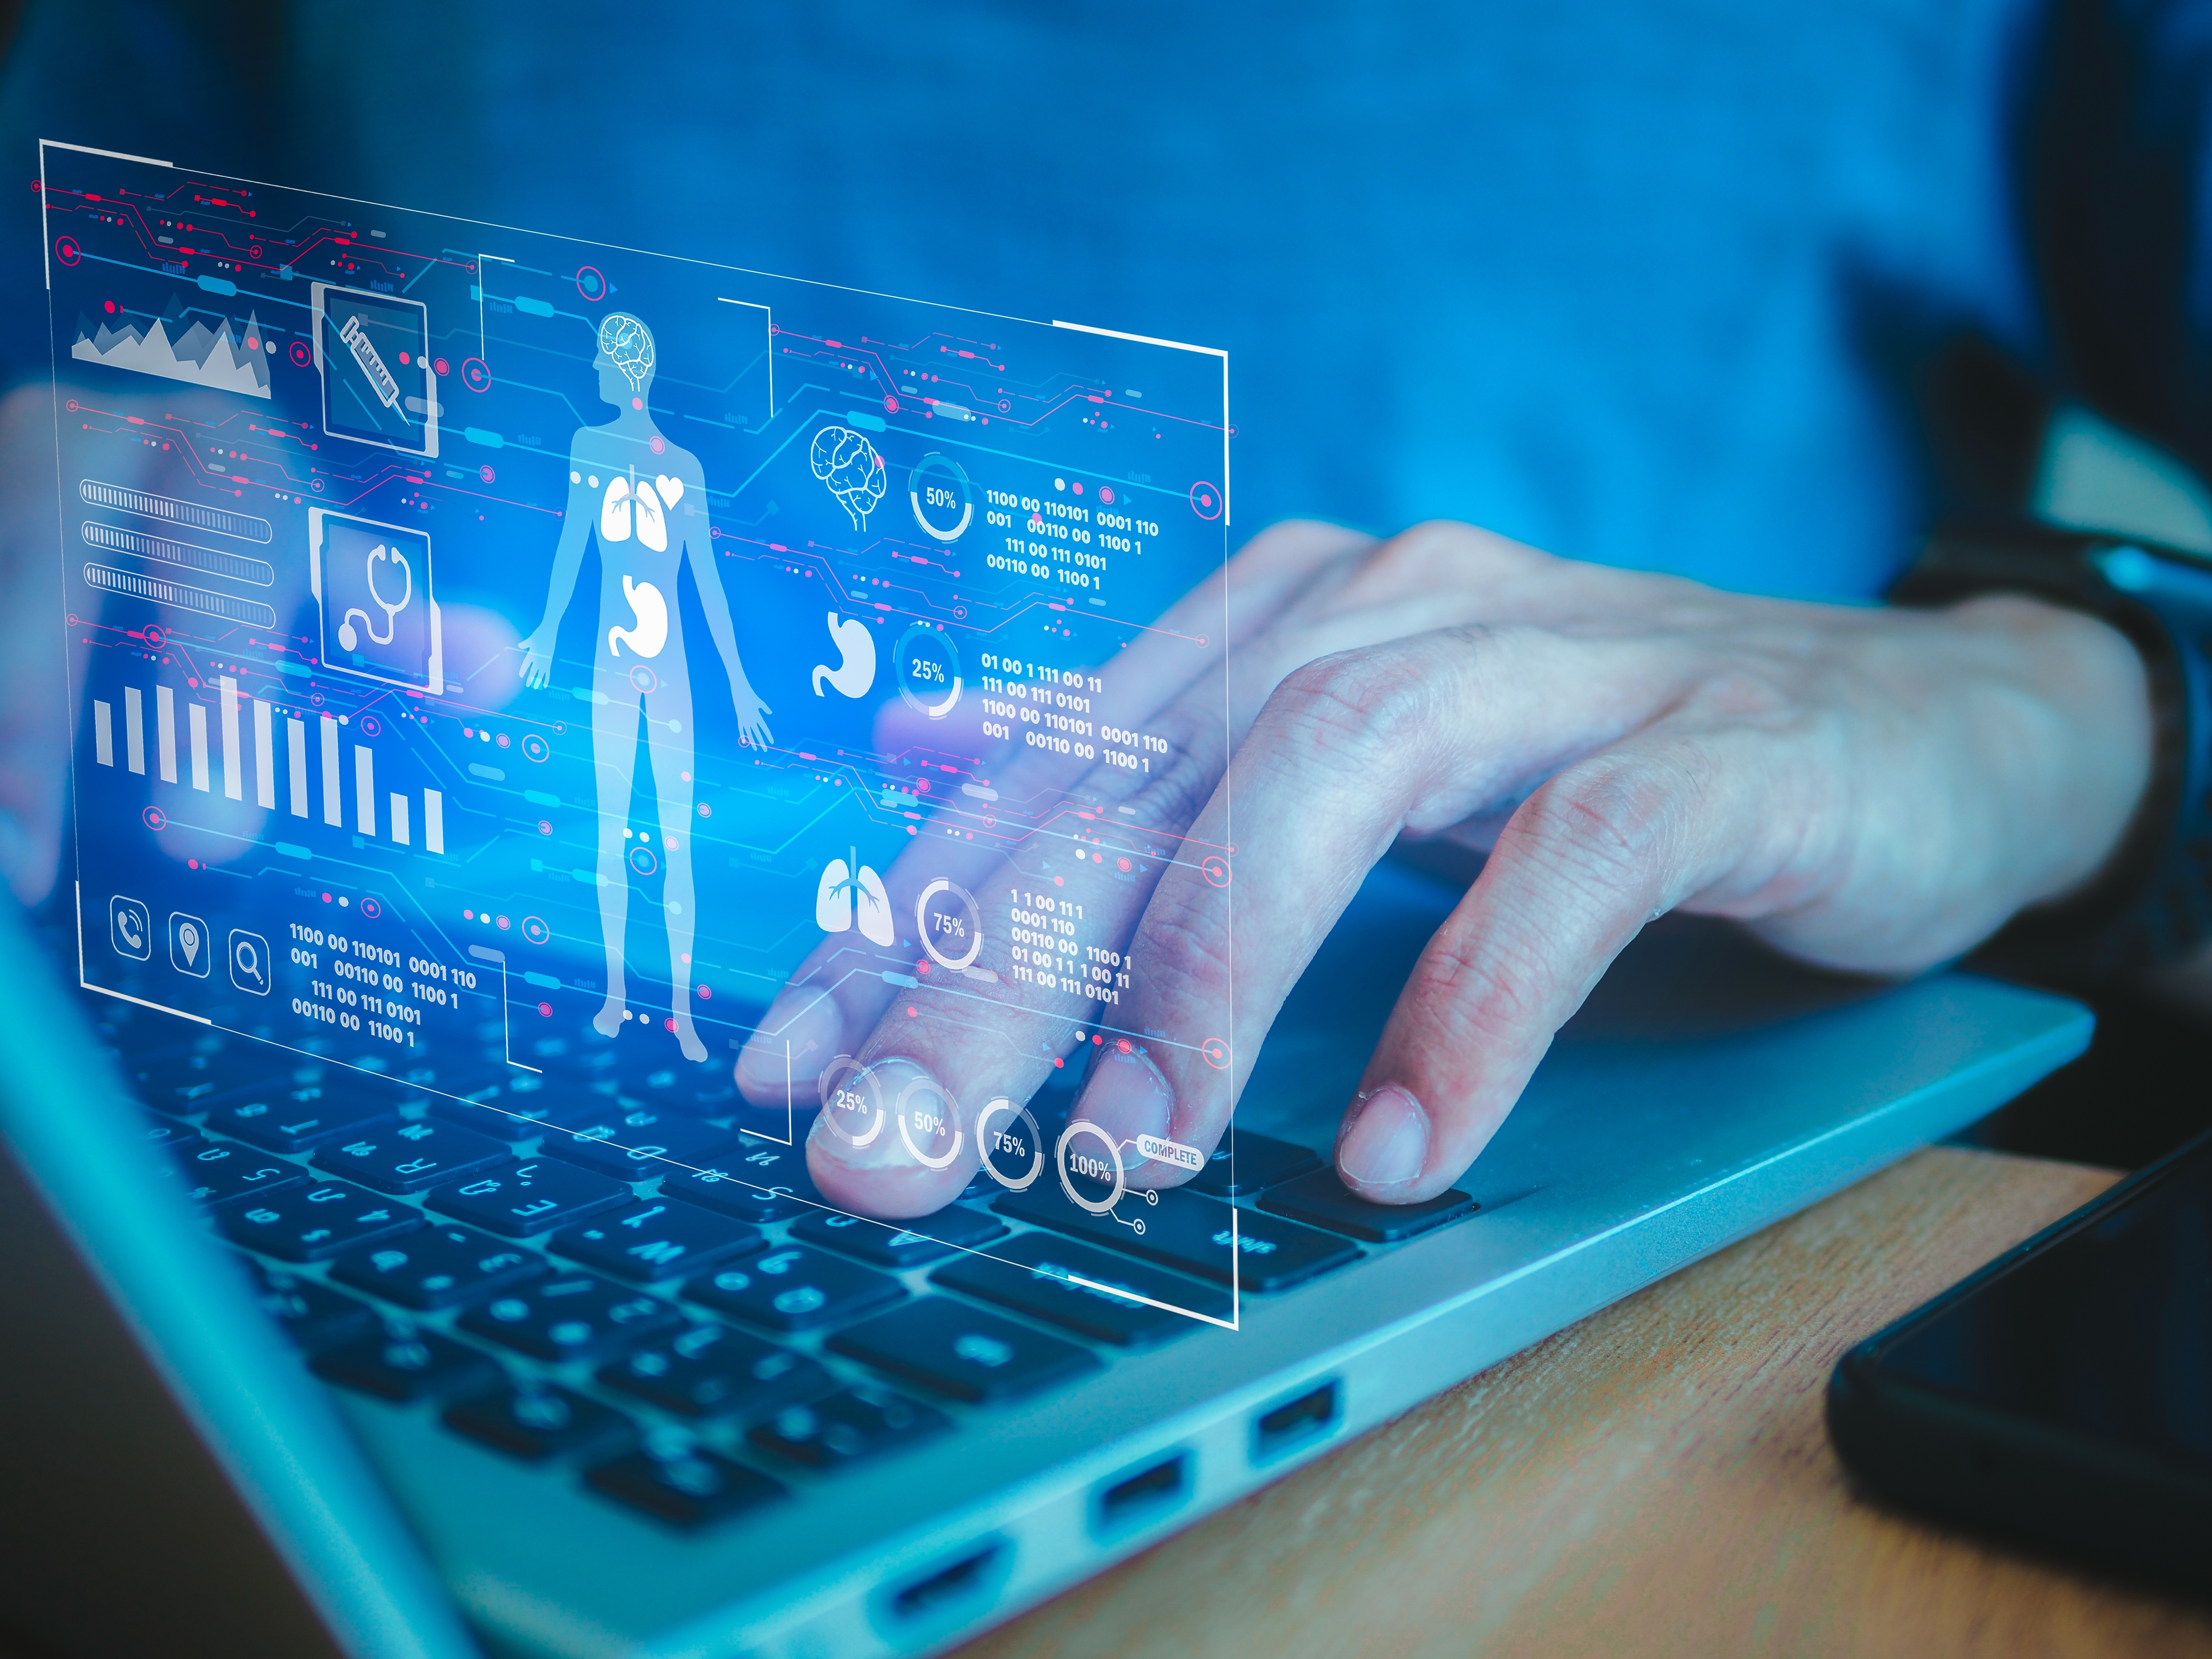 Personal health information on a computer. Image by Anton Nan_Got via Shutterstock.